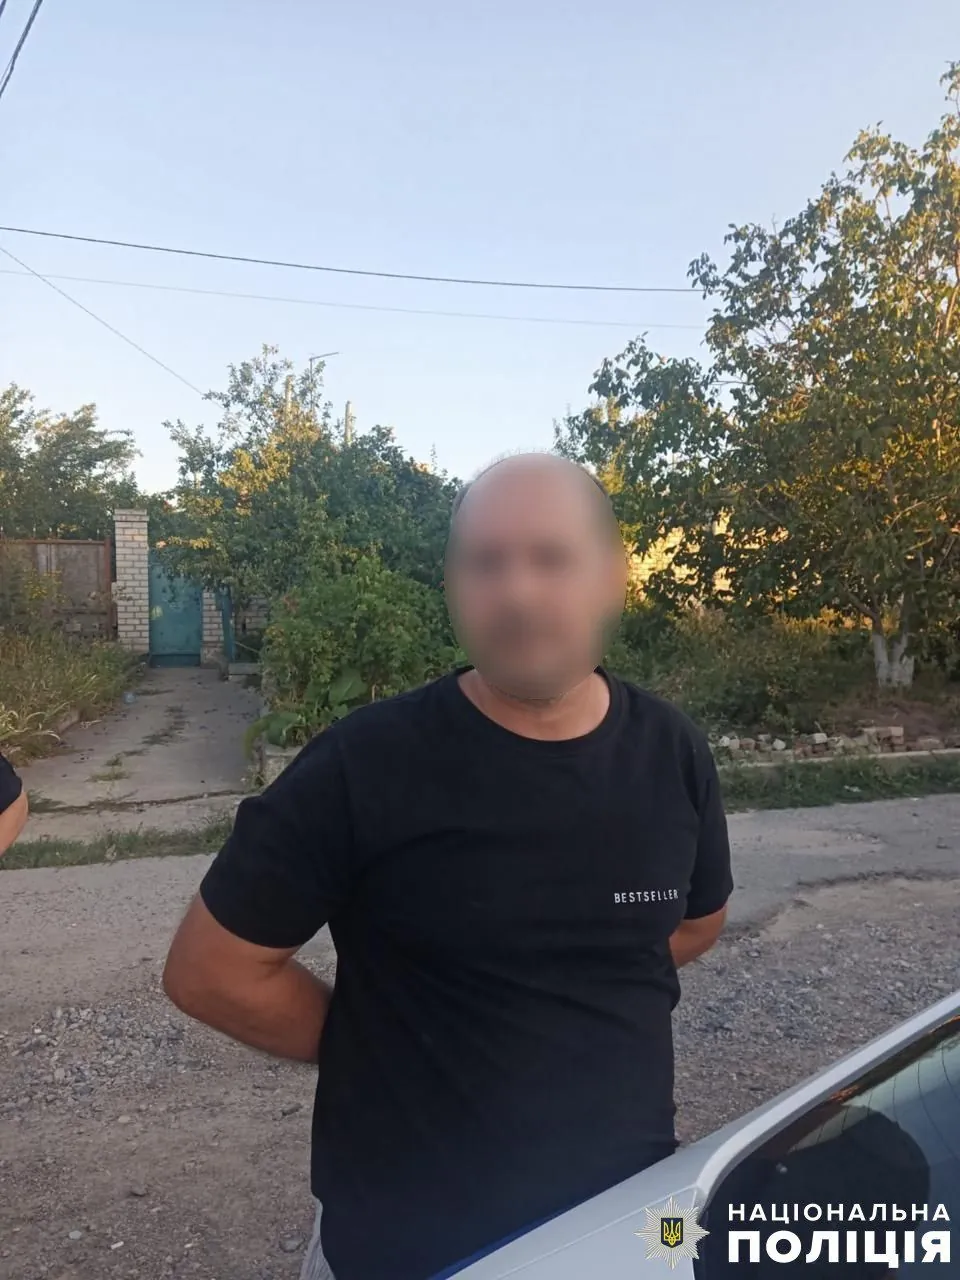 in-kherson-a-man-throws-a-grenade-near-a-store-one-dead-and-one-wounded